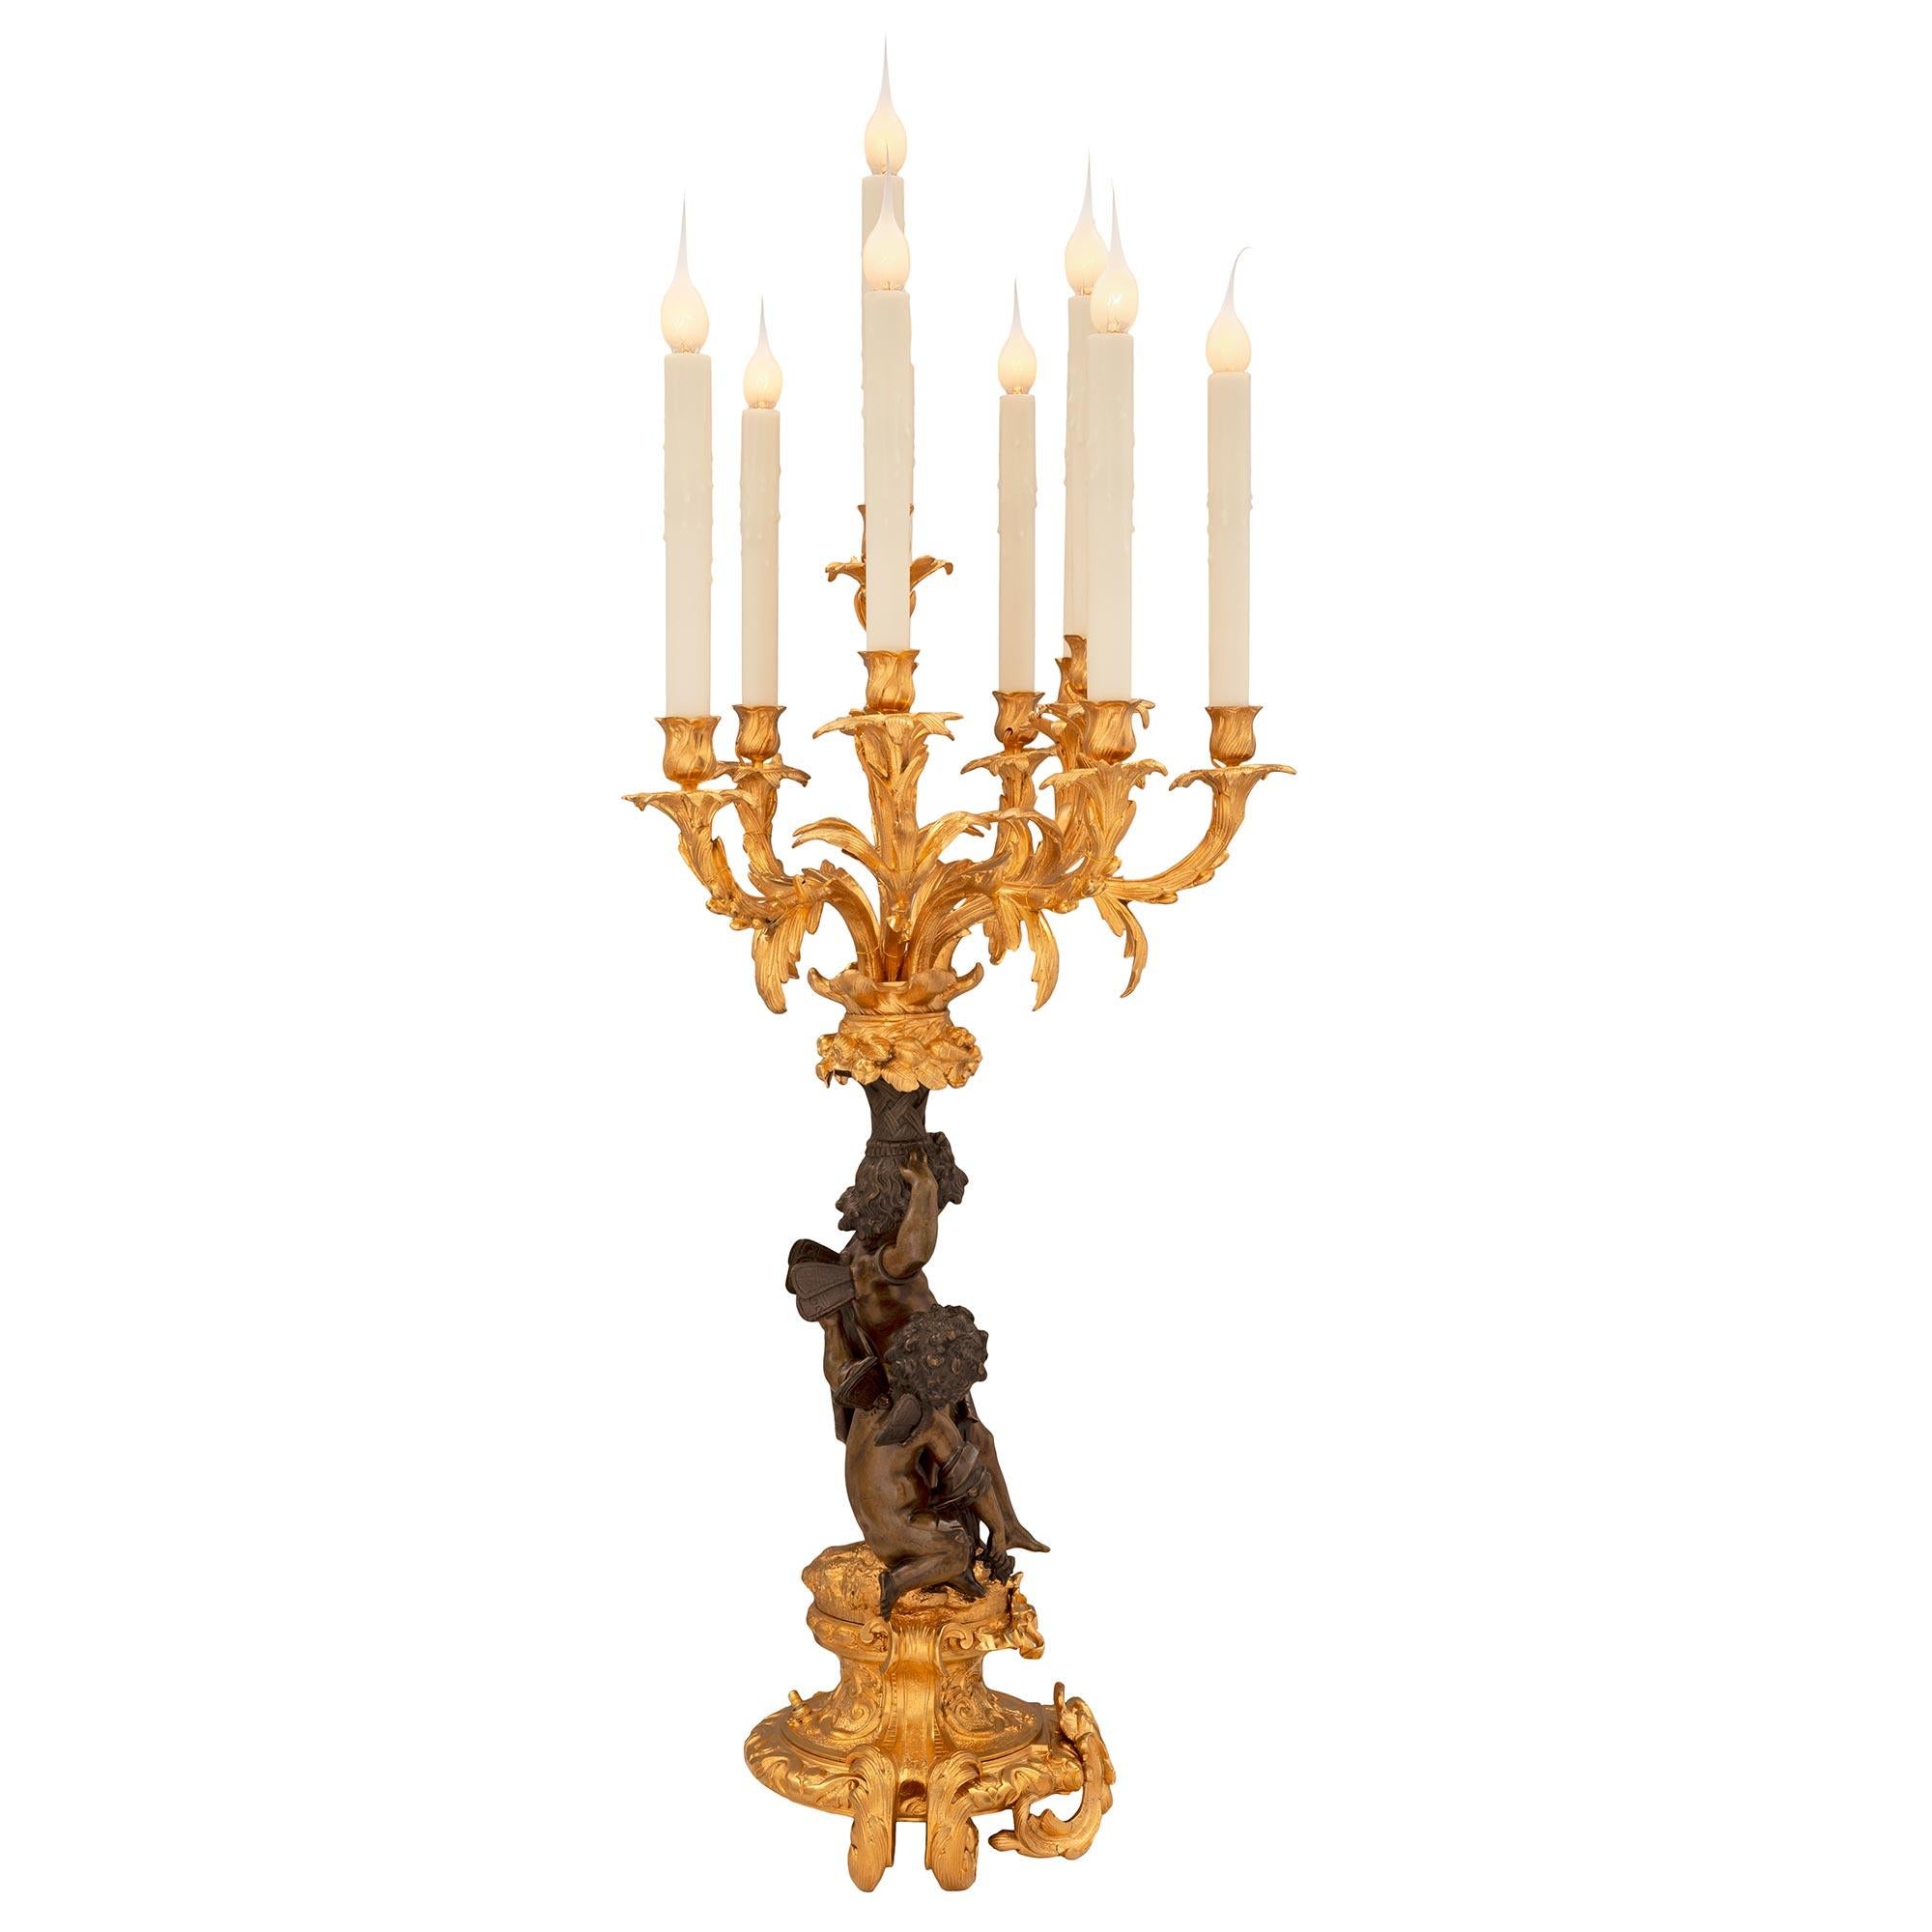 Patinated Pair of French 19th Century Louis XV St. Bronze and Ormolu Candelabra Lamps For Sale